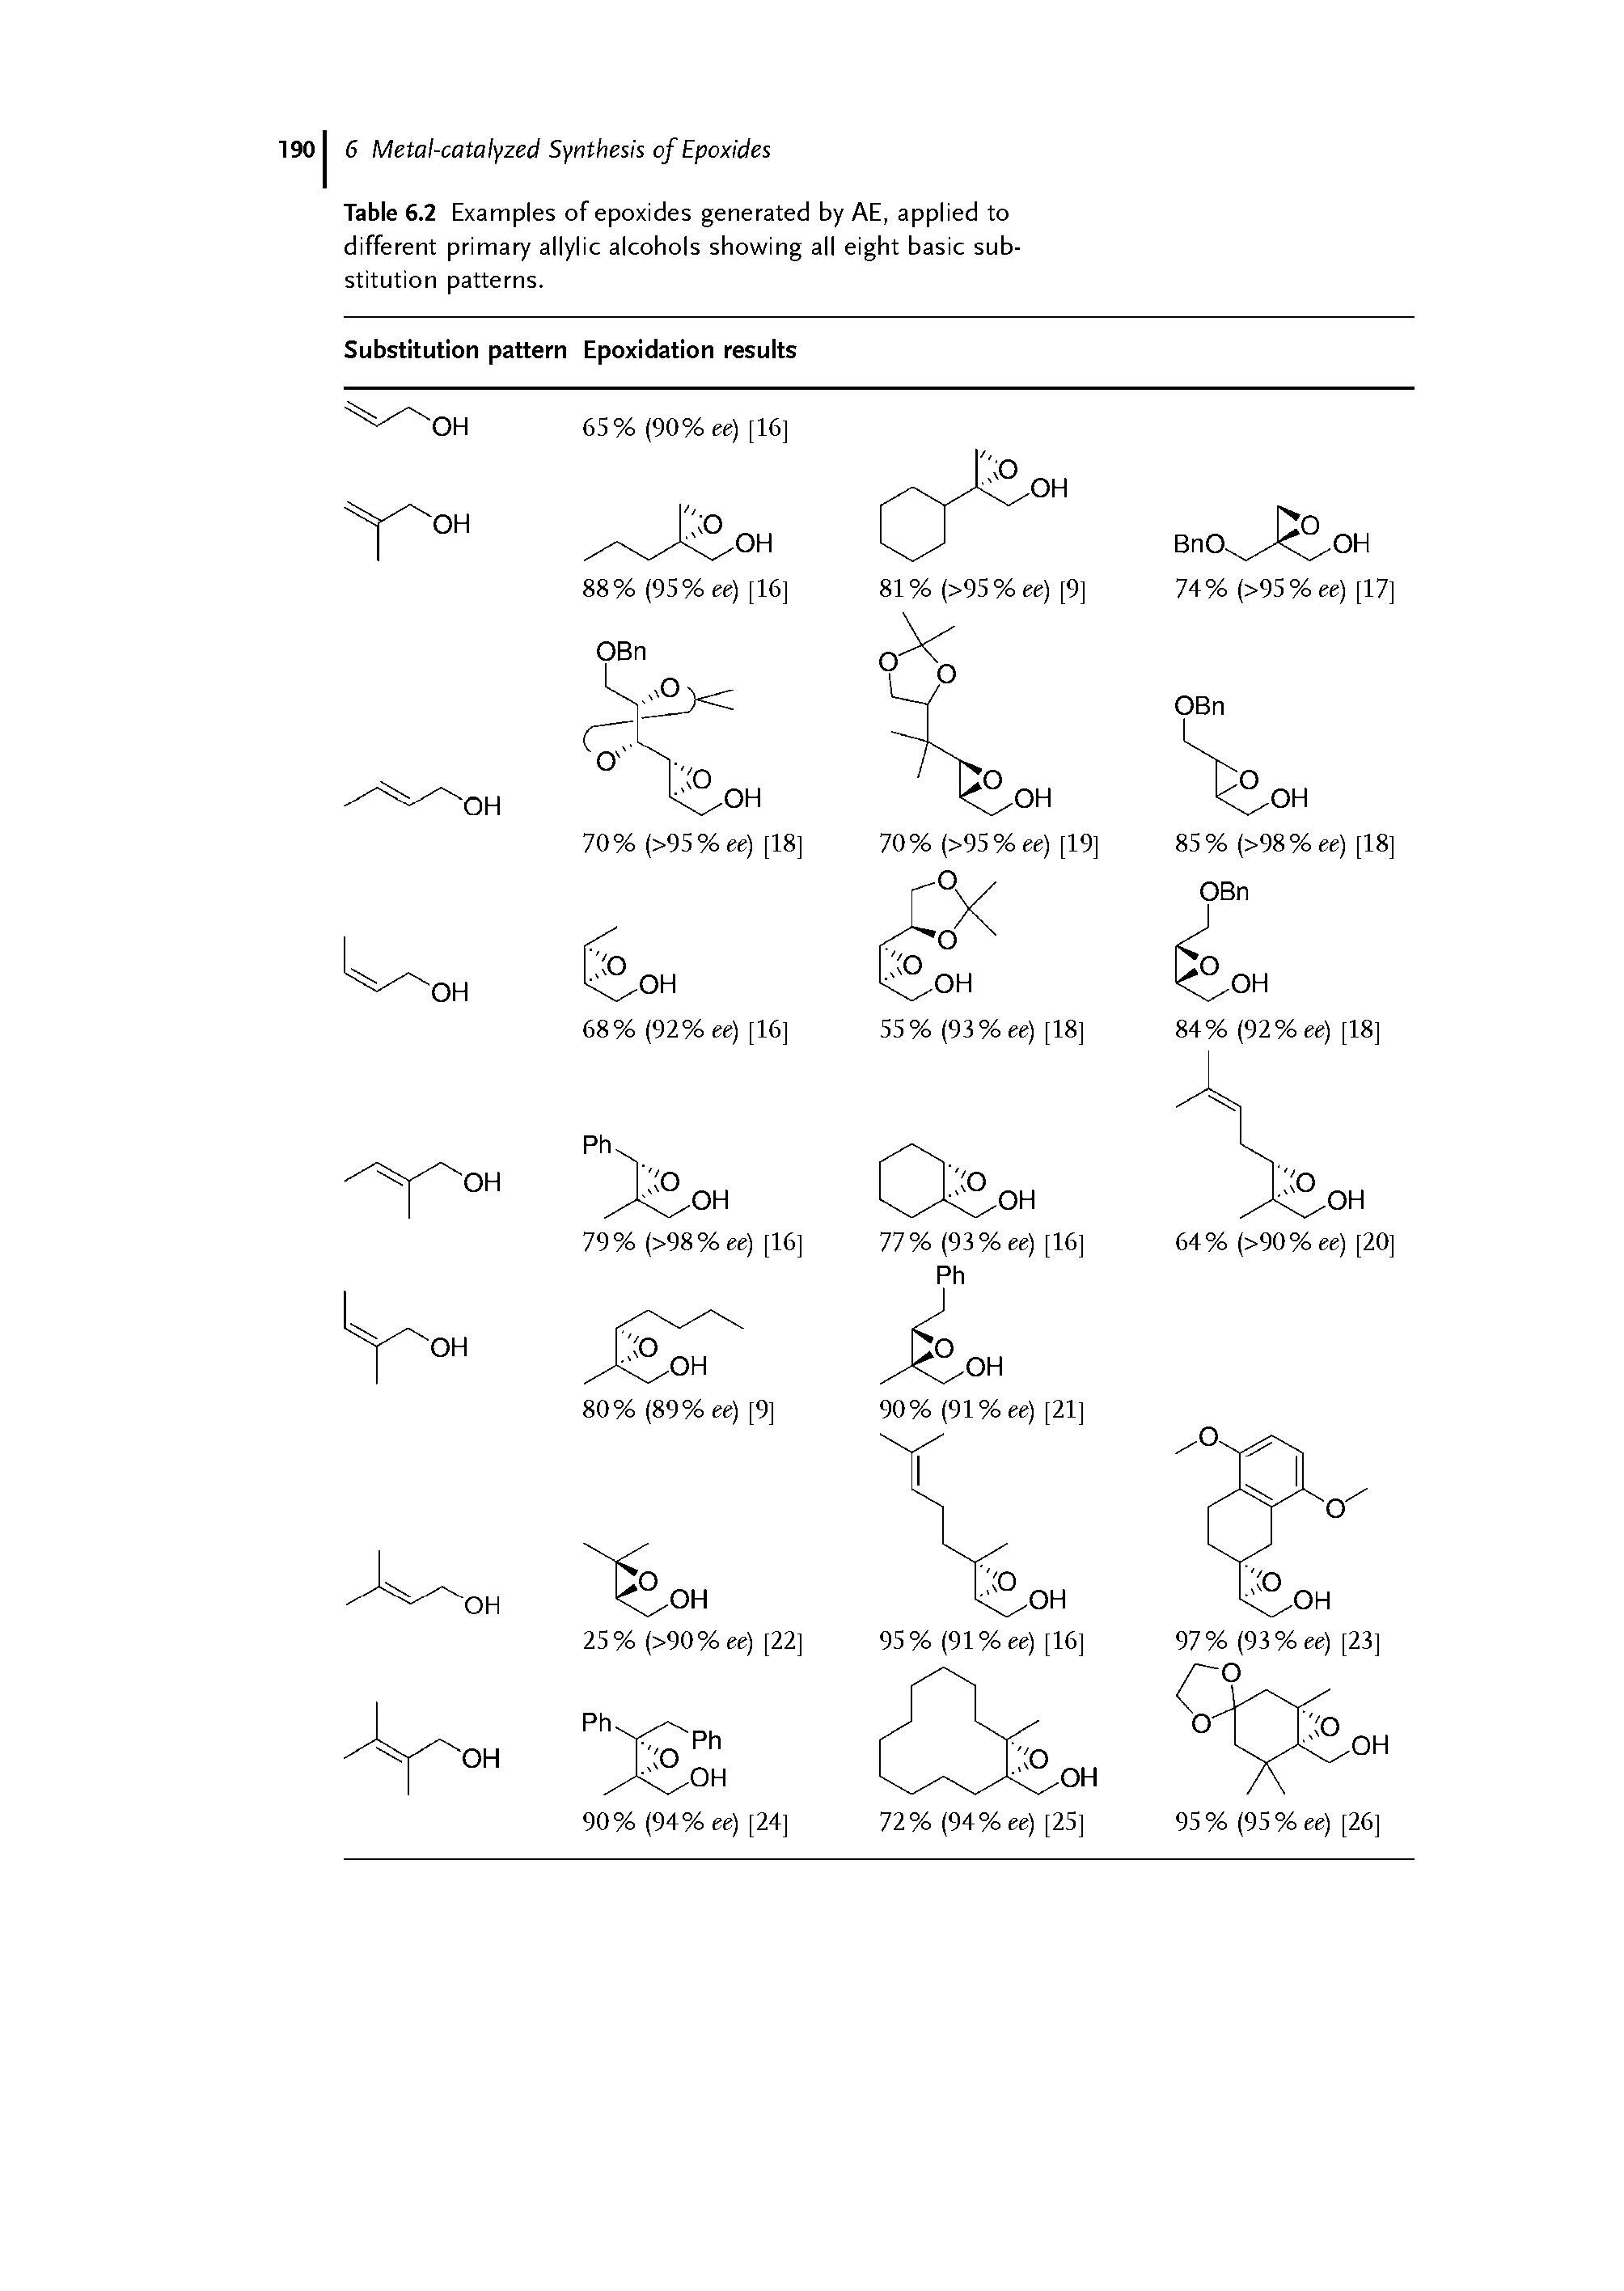 Table 6.2 Examples of epoxides generated by AE, applied to different primary allylic alcohols showing all eight basic substitution patterns.